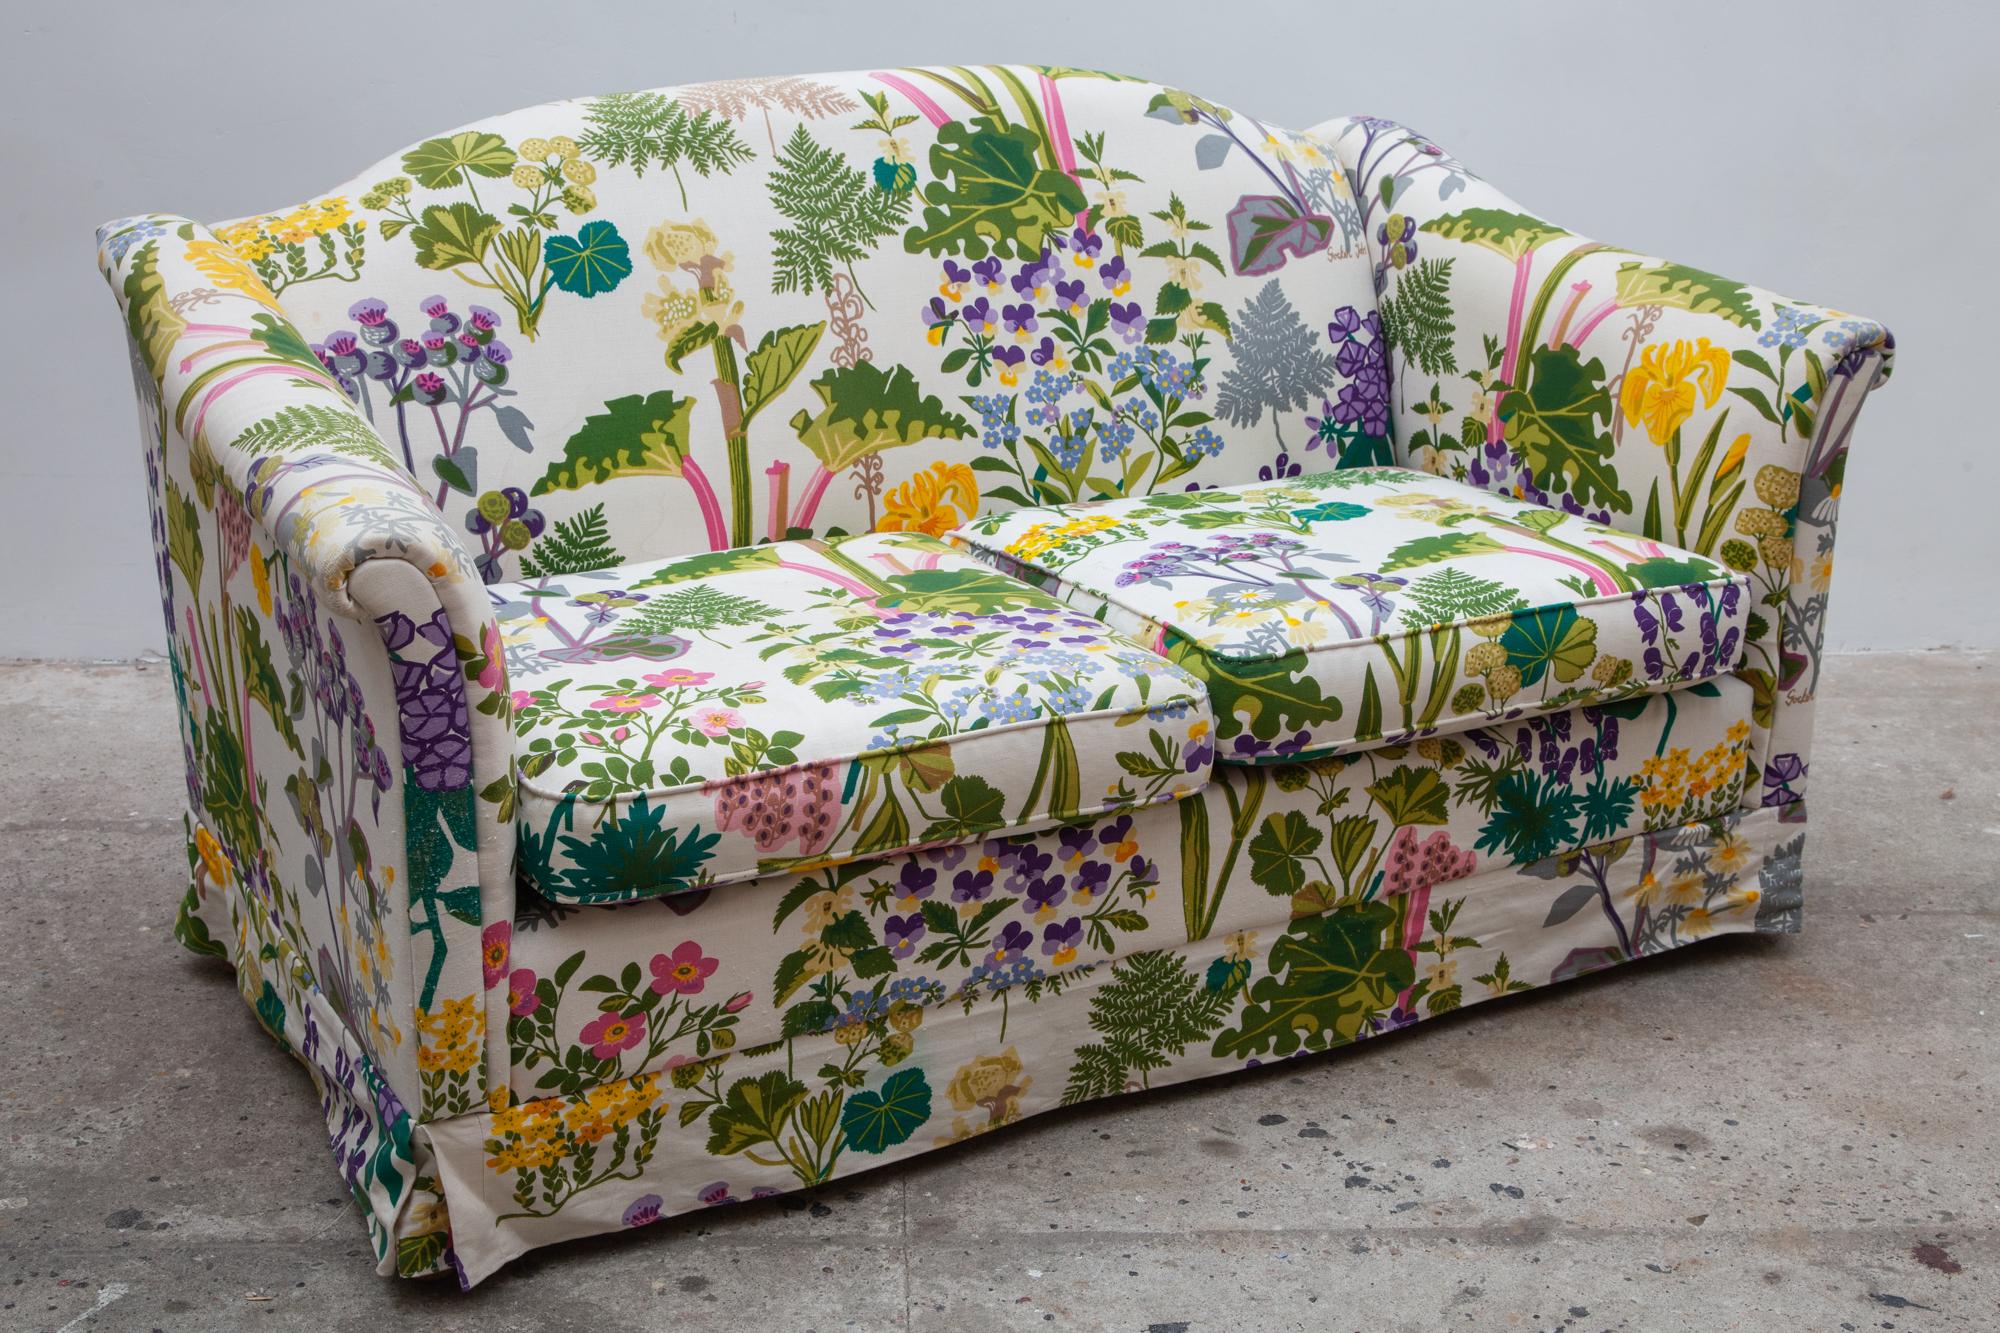 Vintage floral print couch. The fabric is designed by Gocken Jobs, 1969 and features pansies, ferns,rhubarb and more in the botanic garden print.
Gocken Jobs (1914-1995) was a Swedish ceramisist and textile designer. While her sister Lisskulla Jobs